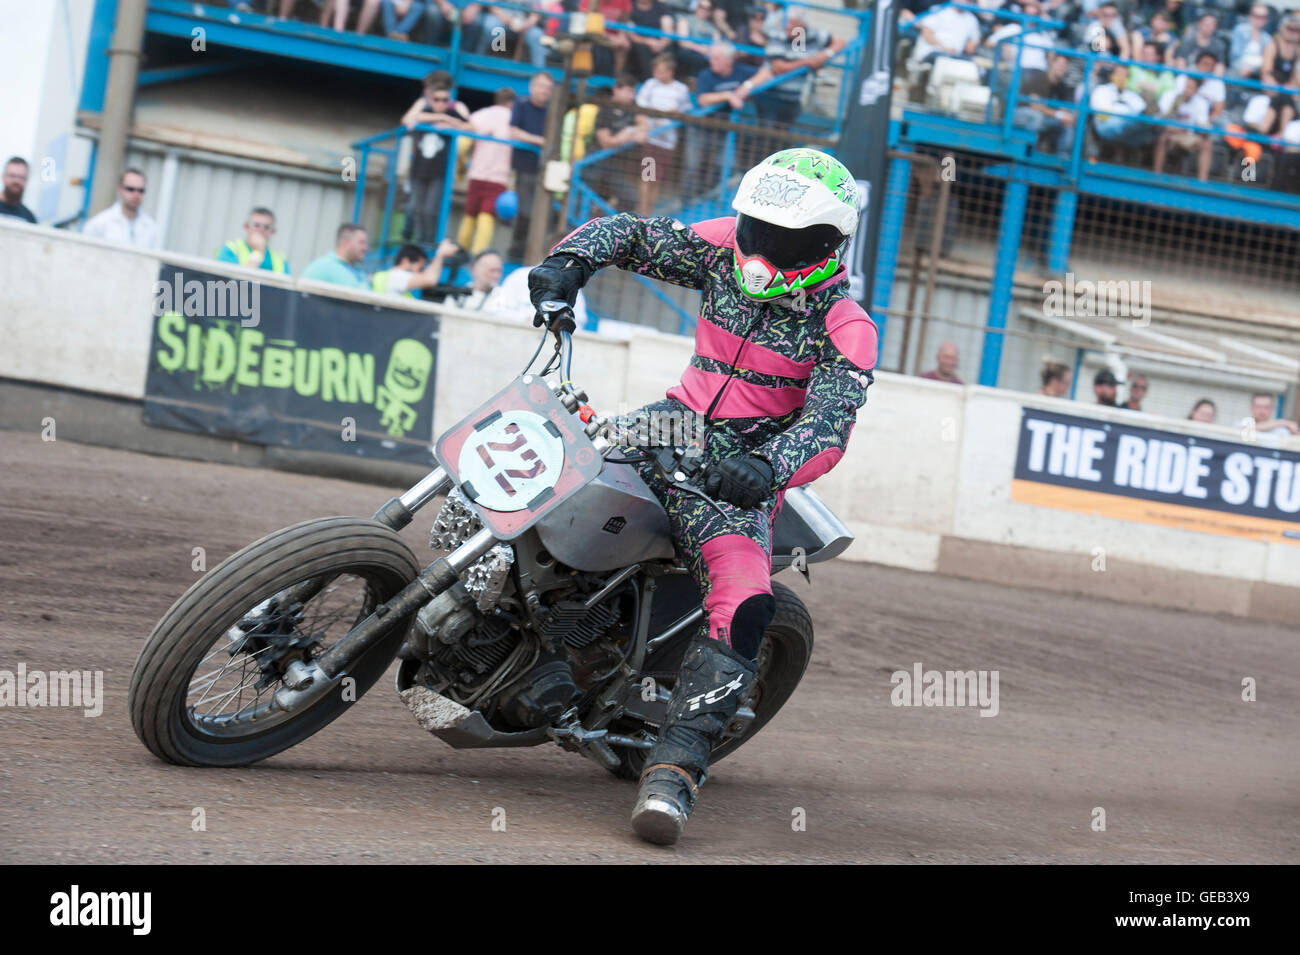 Kings Lynn, Norfolk, United Kingdom. 16.07.2016. Fifth annual Dirt Quake festival with Guy Martin and Carl 'Foggy' Fogarty.  A racer in retro pink leathers. Stock Photo